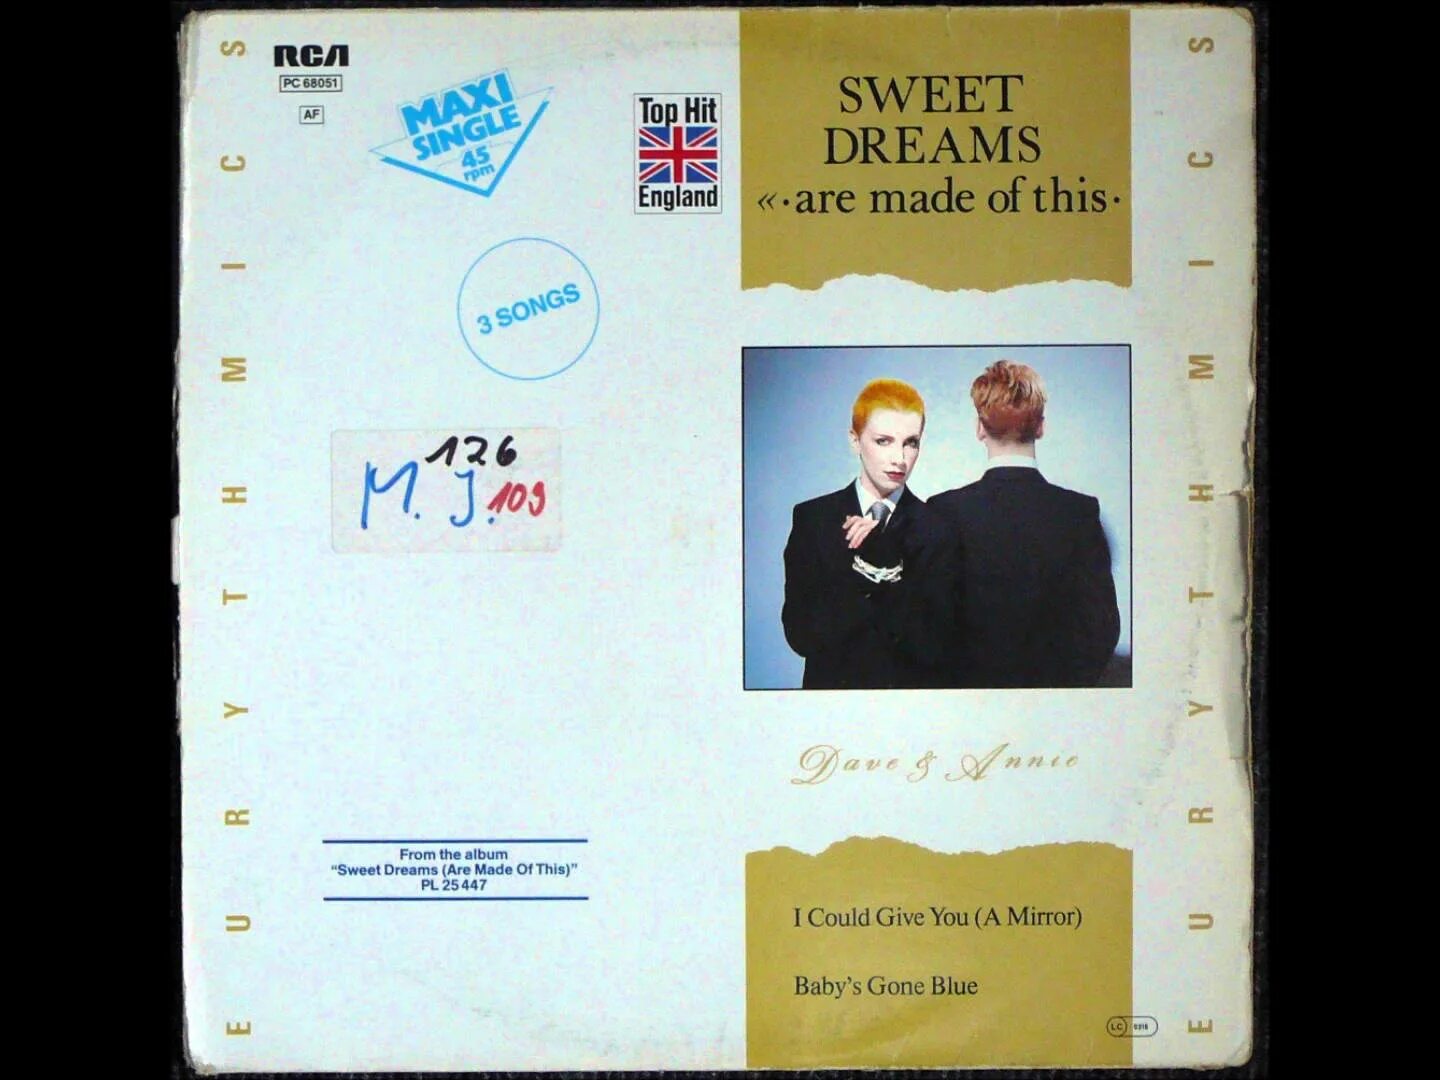 Sweet Dreams are made of this. Eurythmics "Sweet Dreams". Eurythmics Sweet Dreams 1983. Sweet Dreams are made of this Eurythmics. This dreams песня